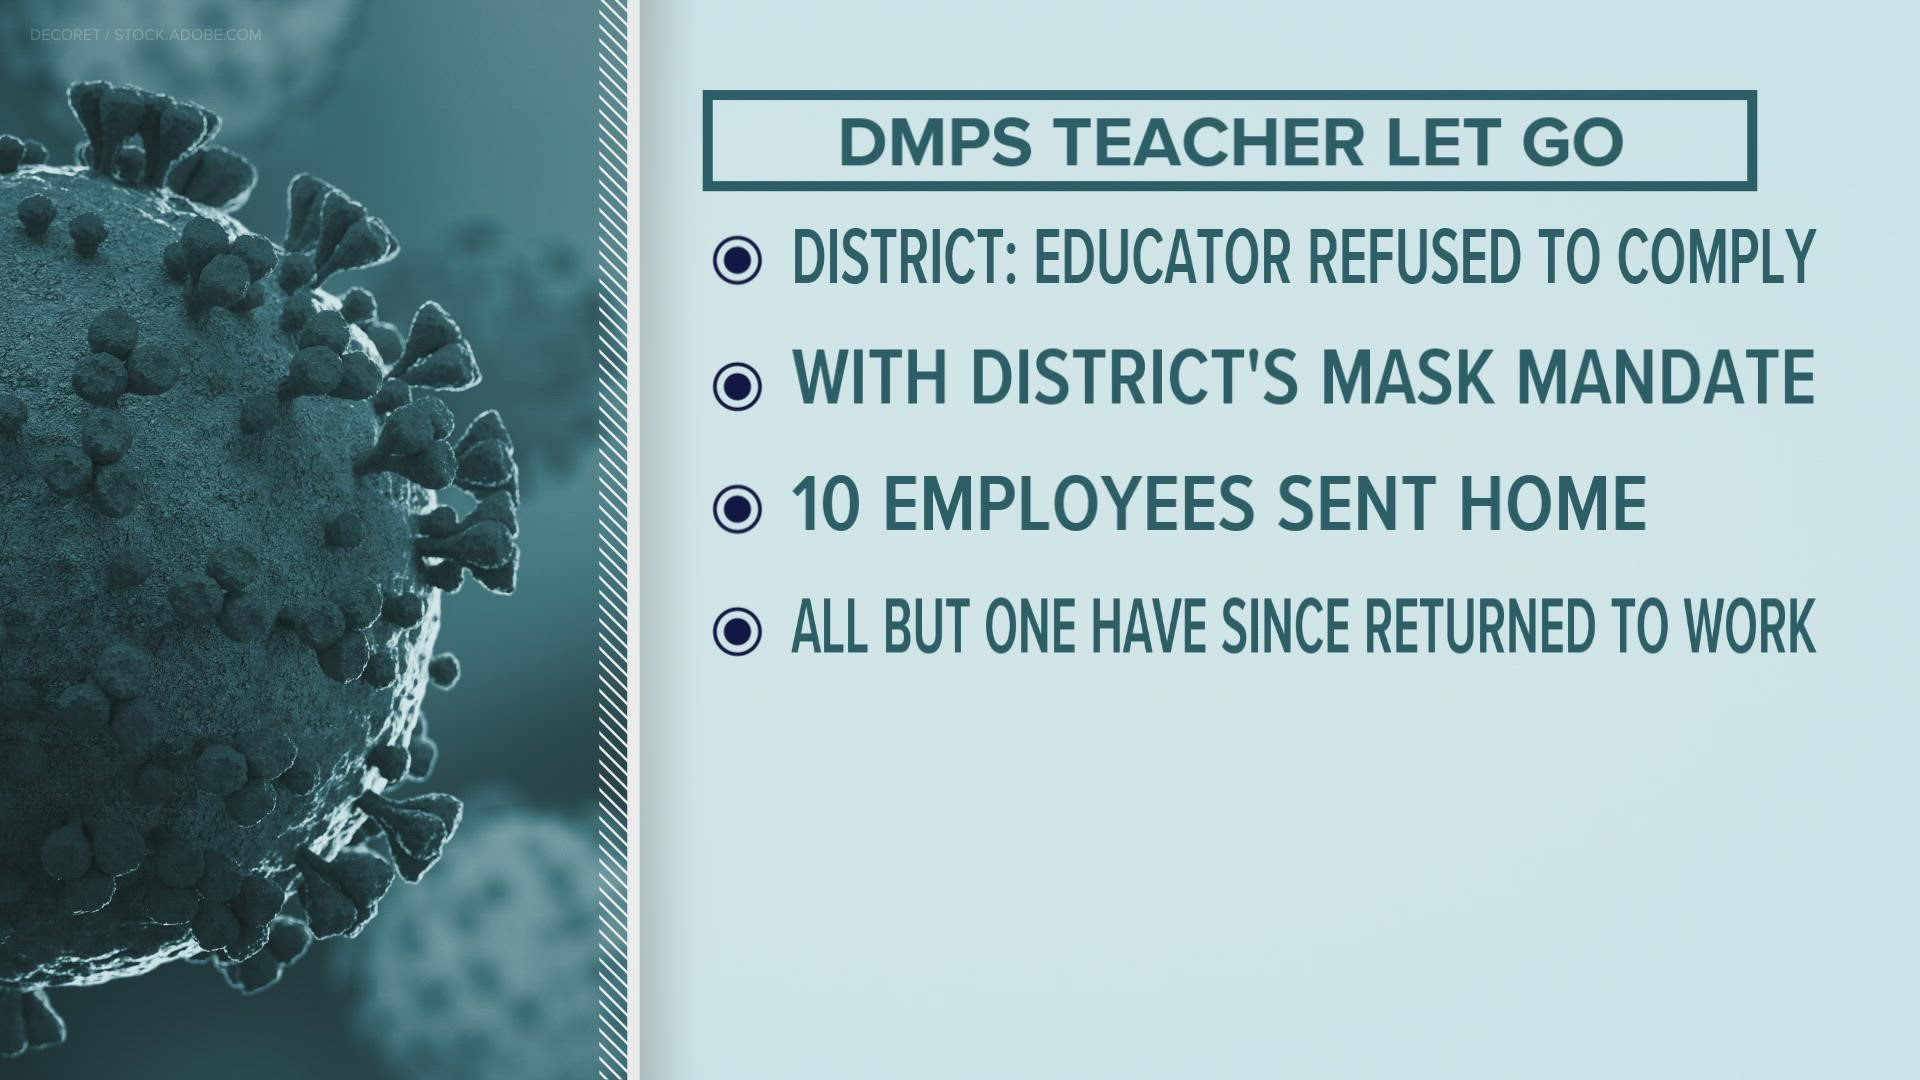 Iowa's largest school district said the number of staff not complying with the mask mandate is very small.